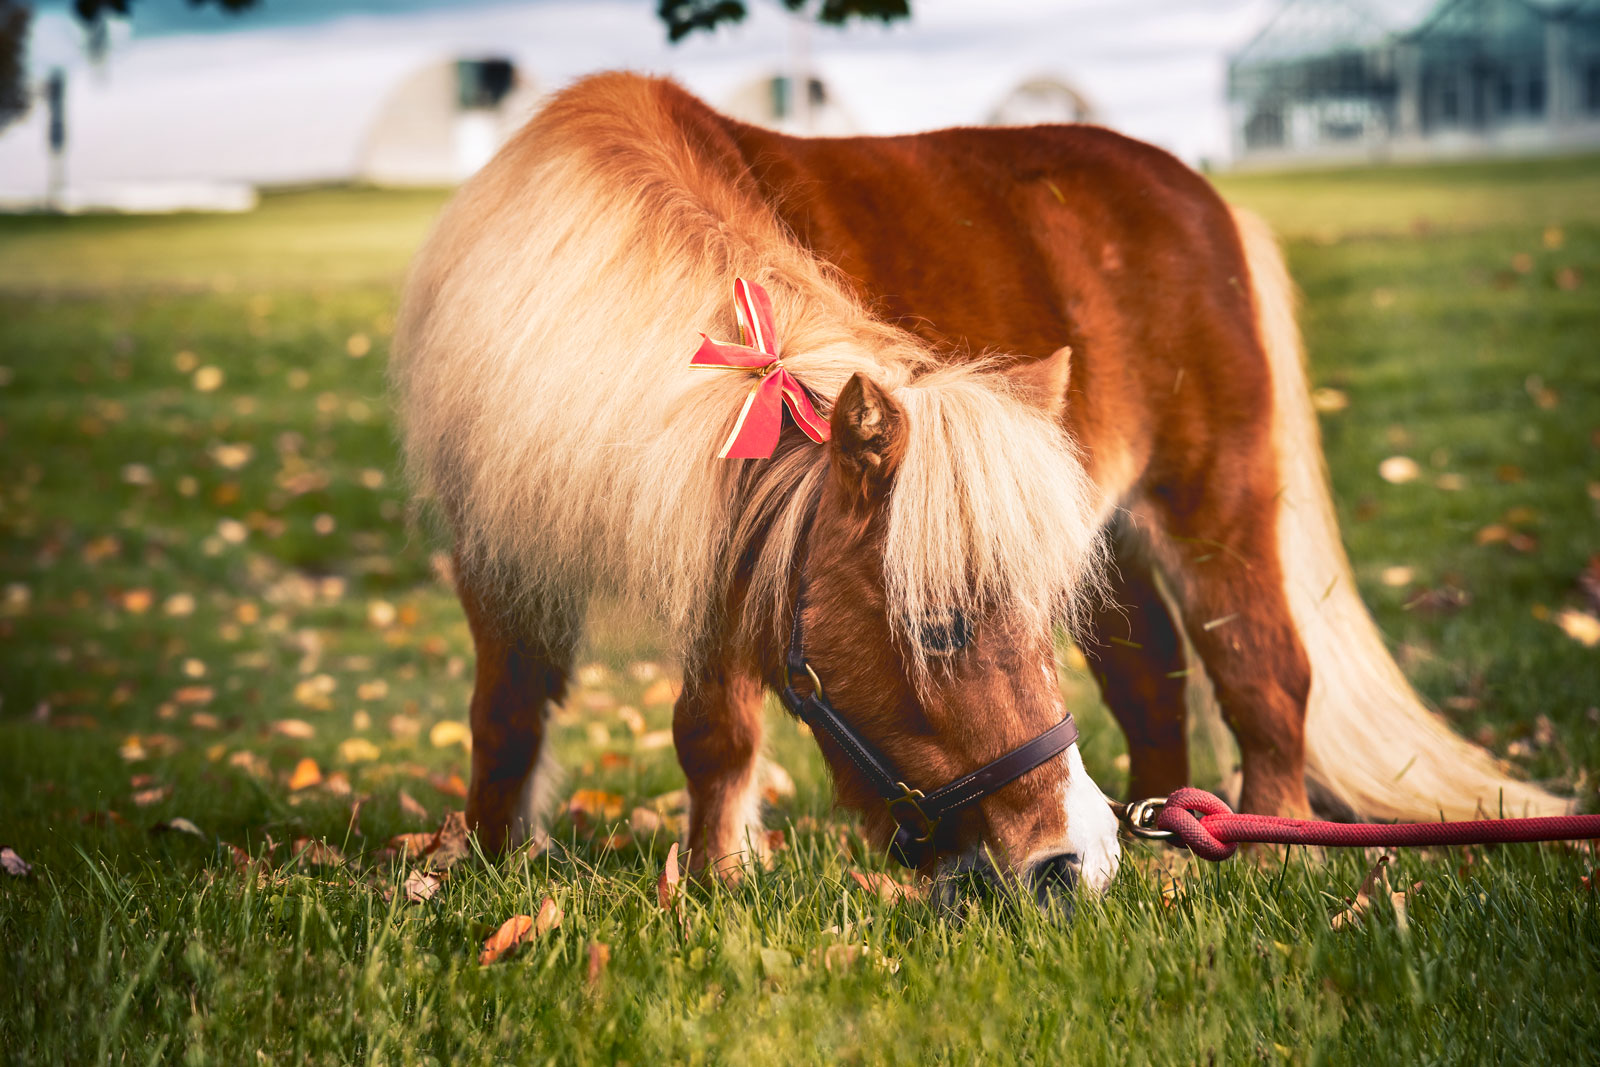 Minnie to the Max! CVM’s Beloved Mini Horse Is a Big Red Star